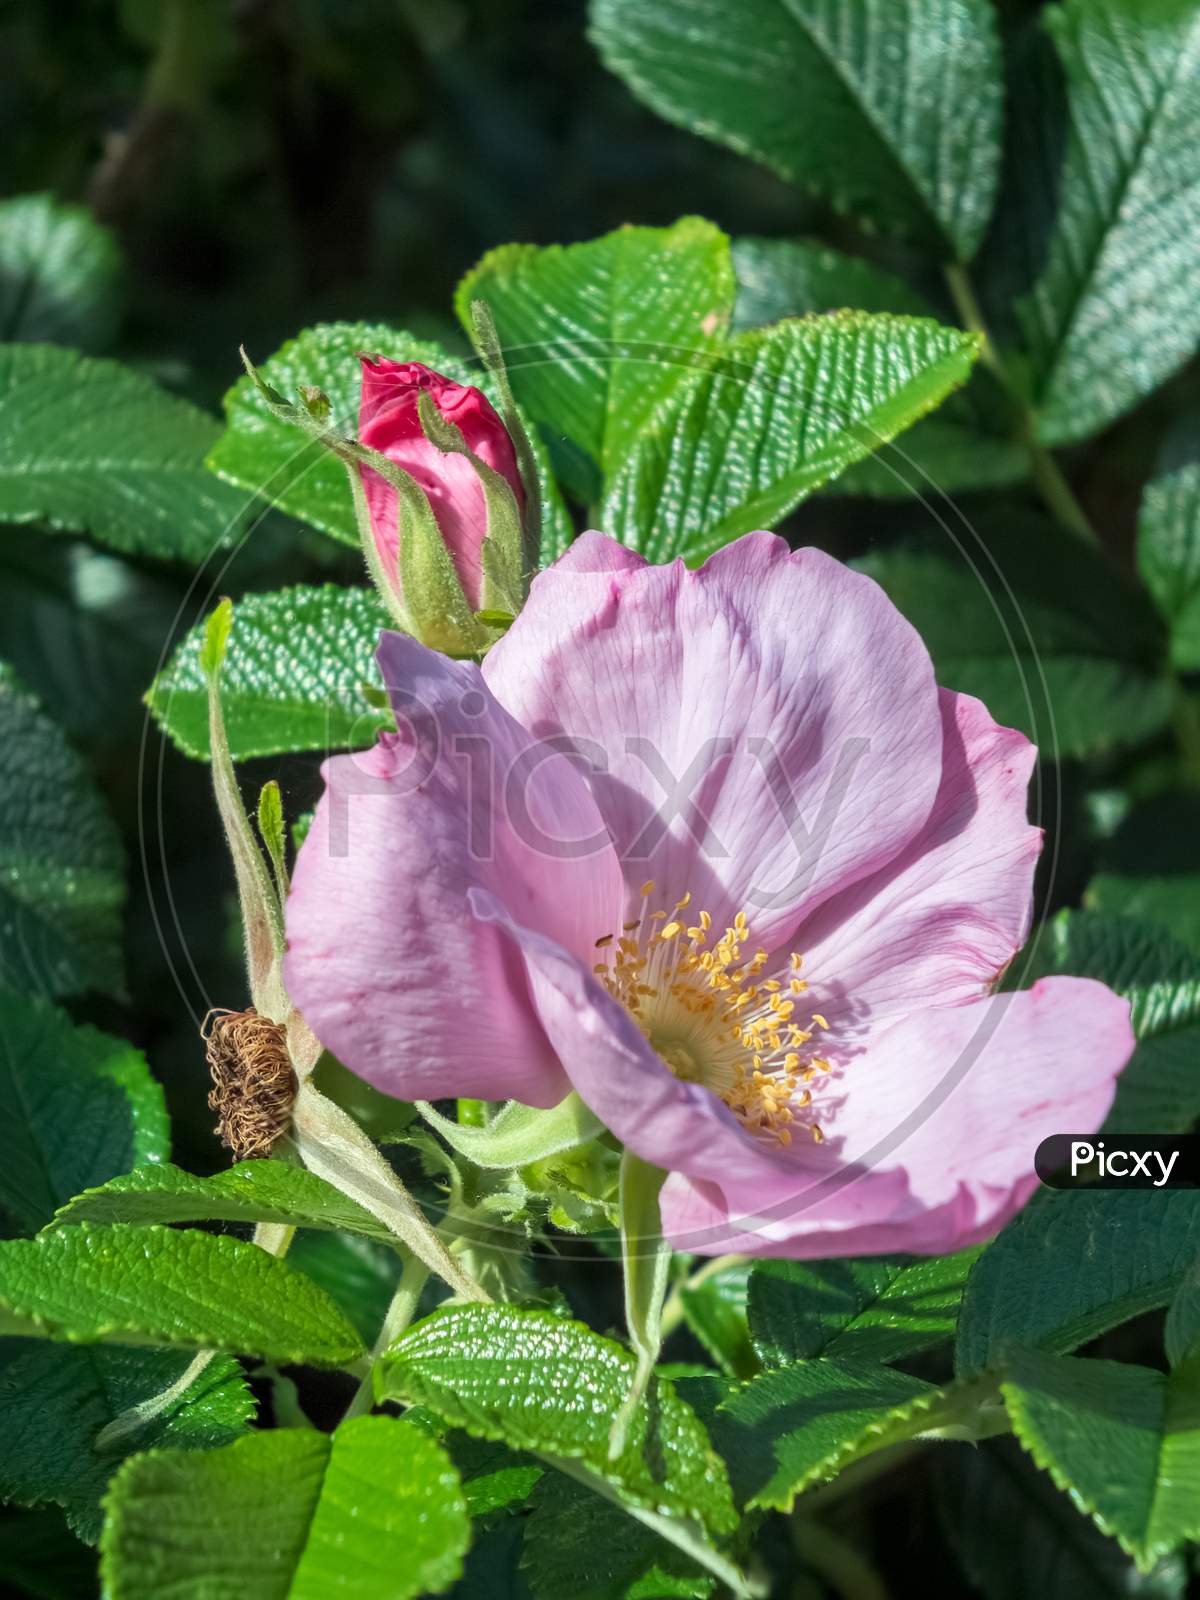 Cultivated Ornamental Dog Rose Flowering In An English Garden